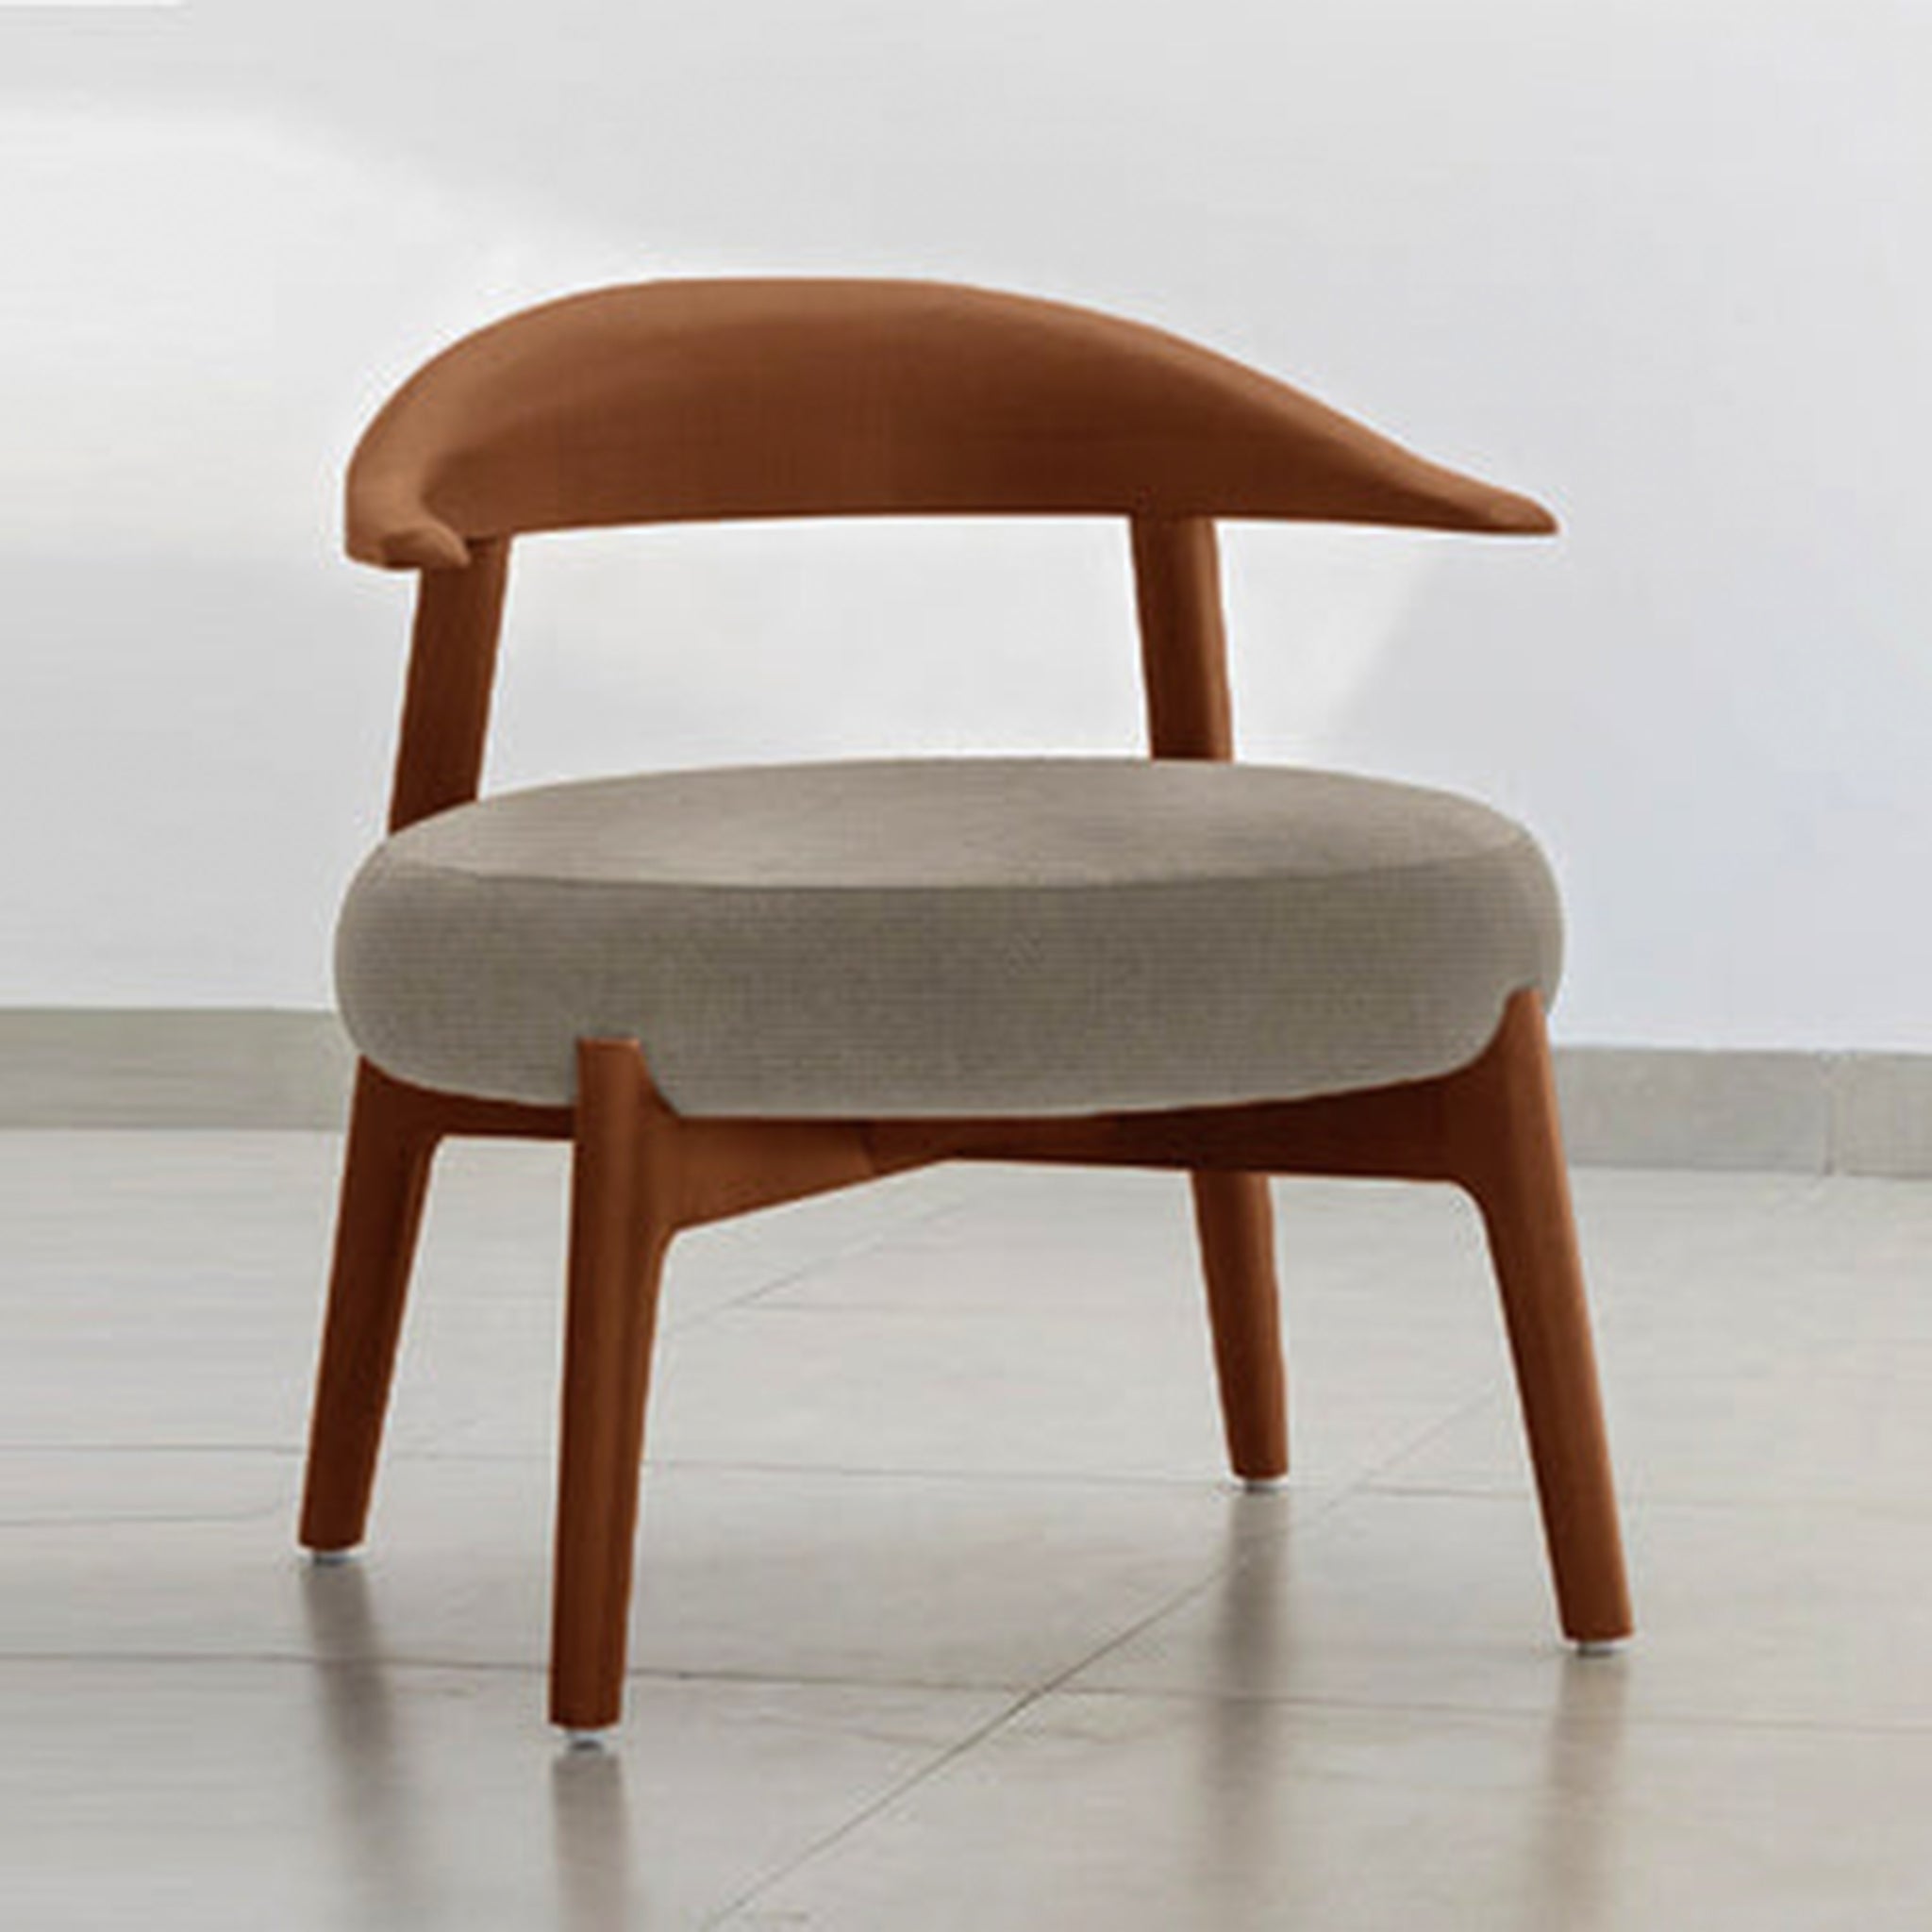 "The Hyde Accent Chair with unique wooden frame and comfortable seat"